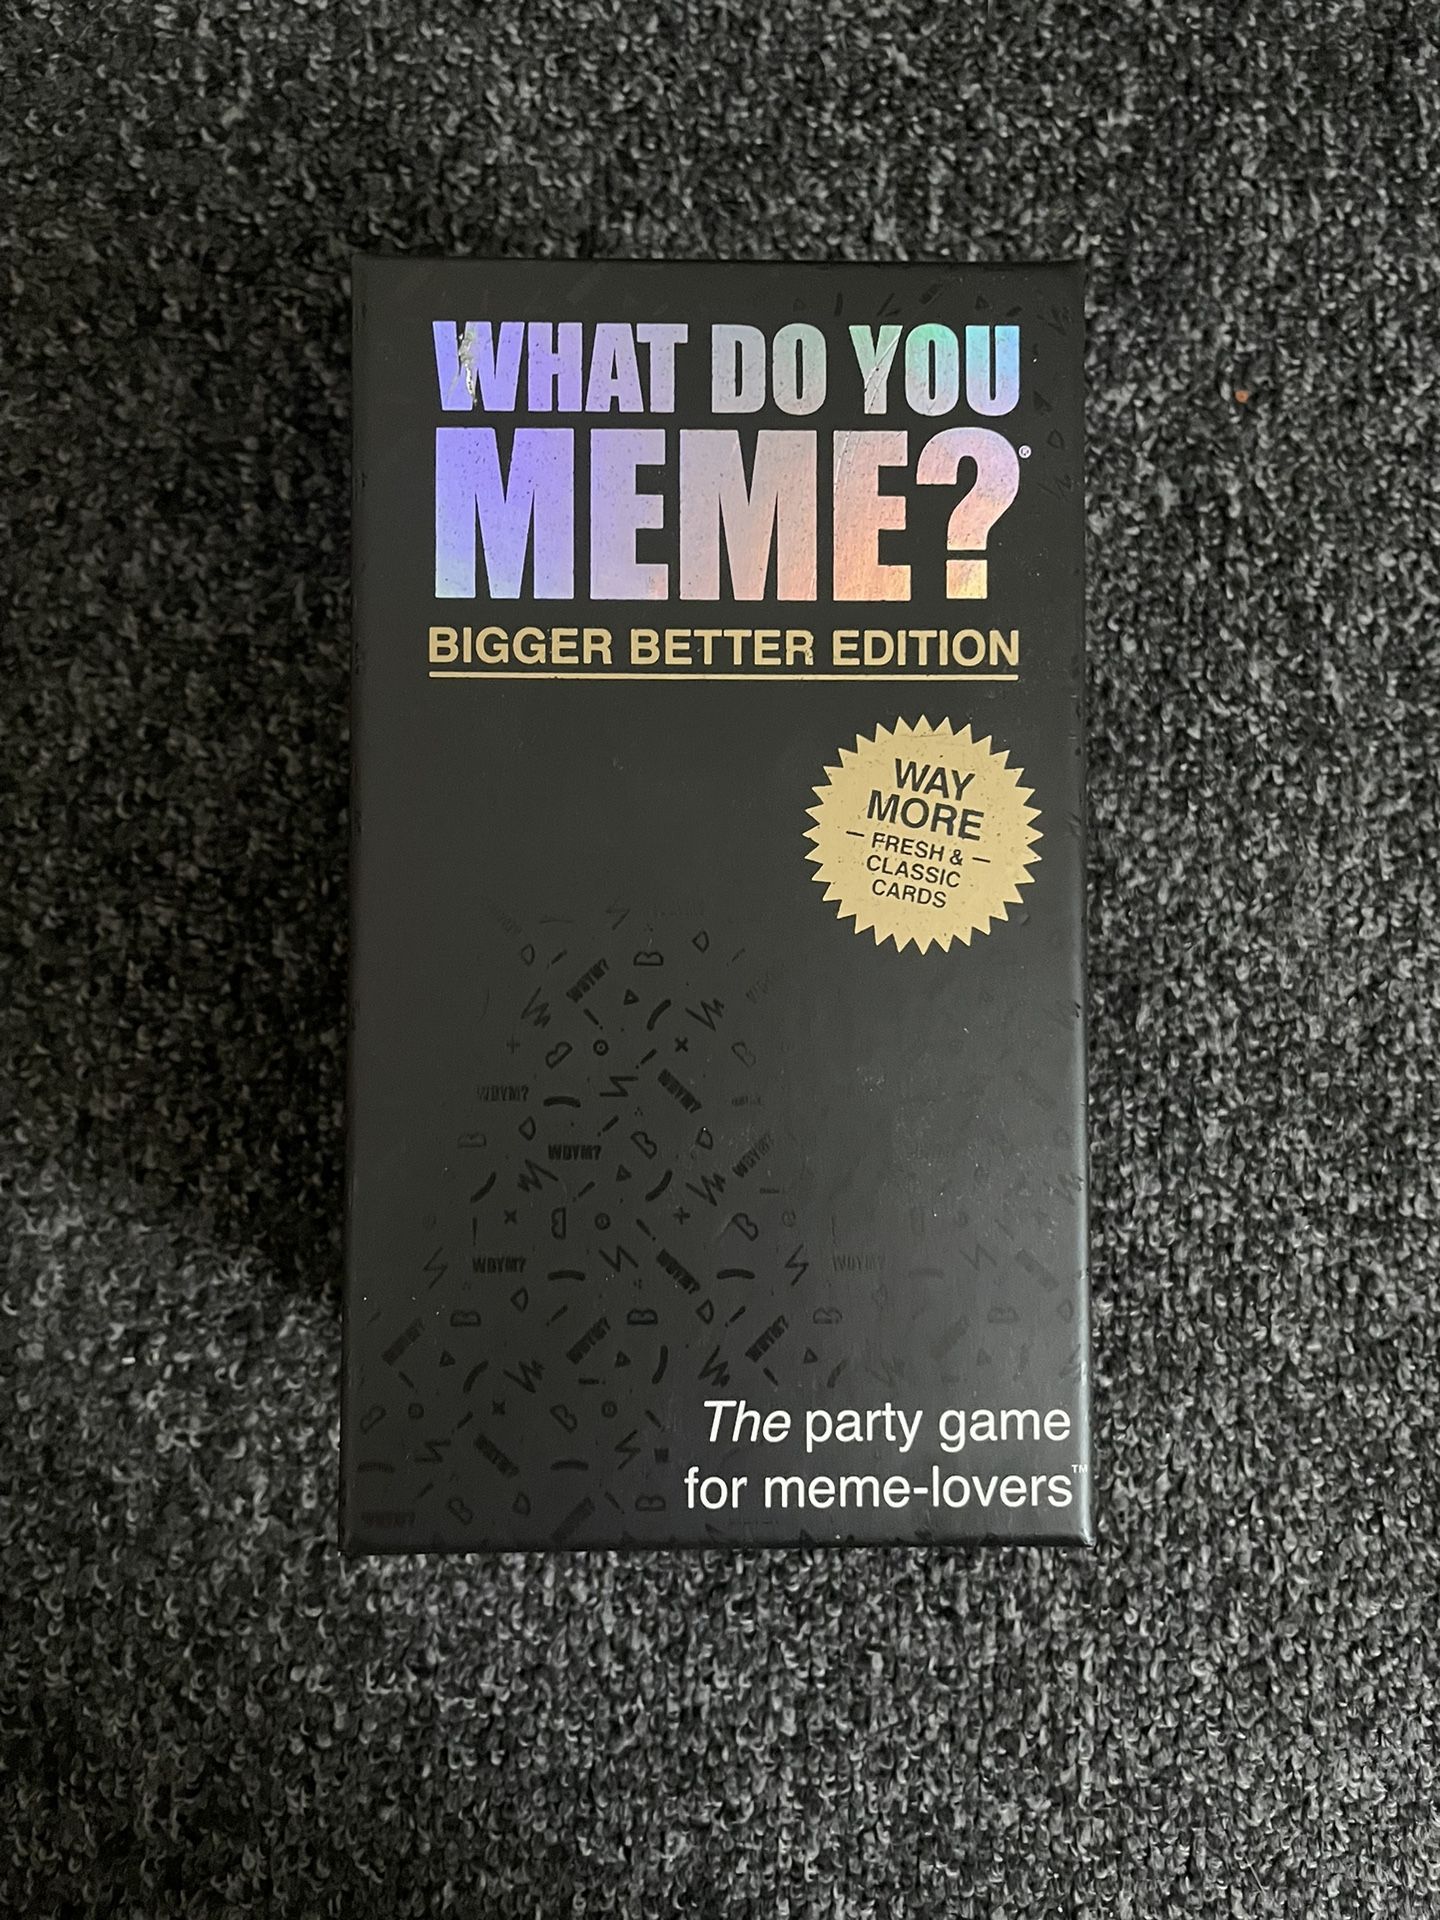 What Do You Meme? Board Game